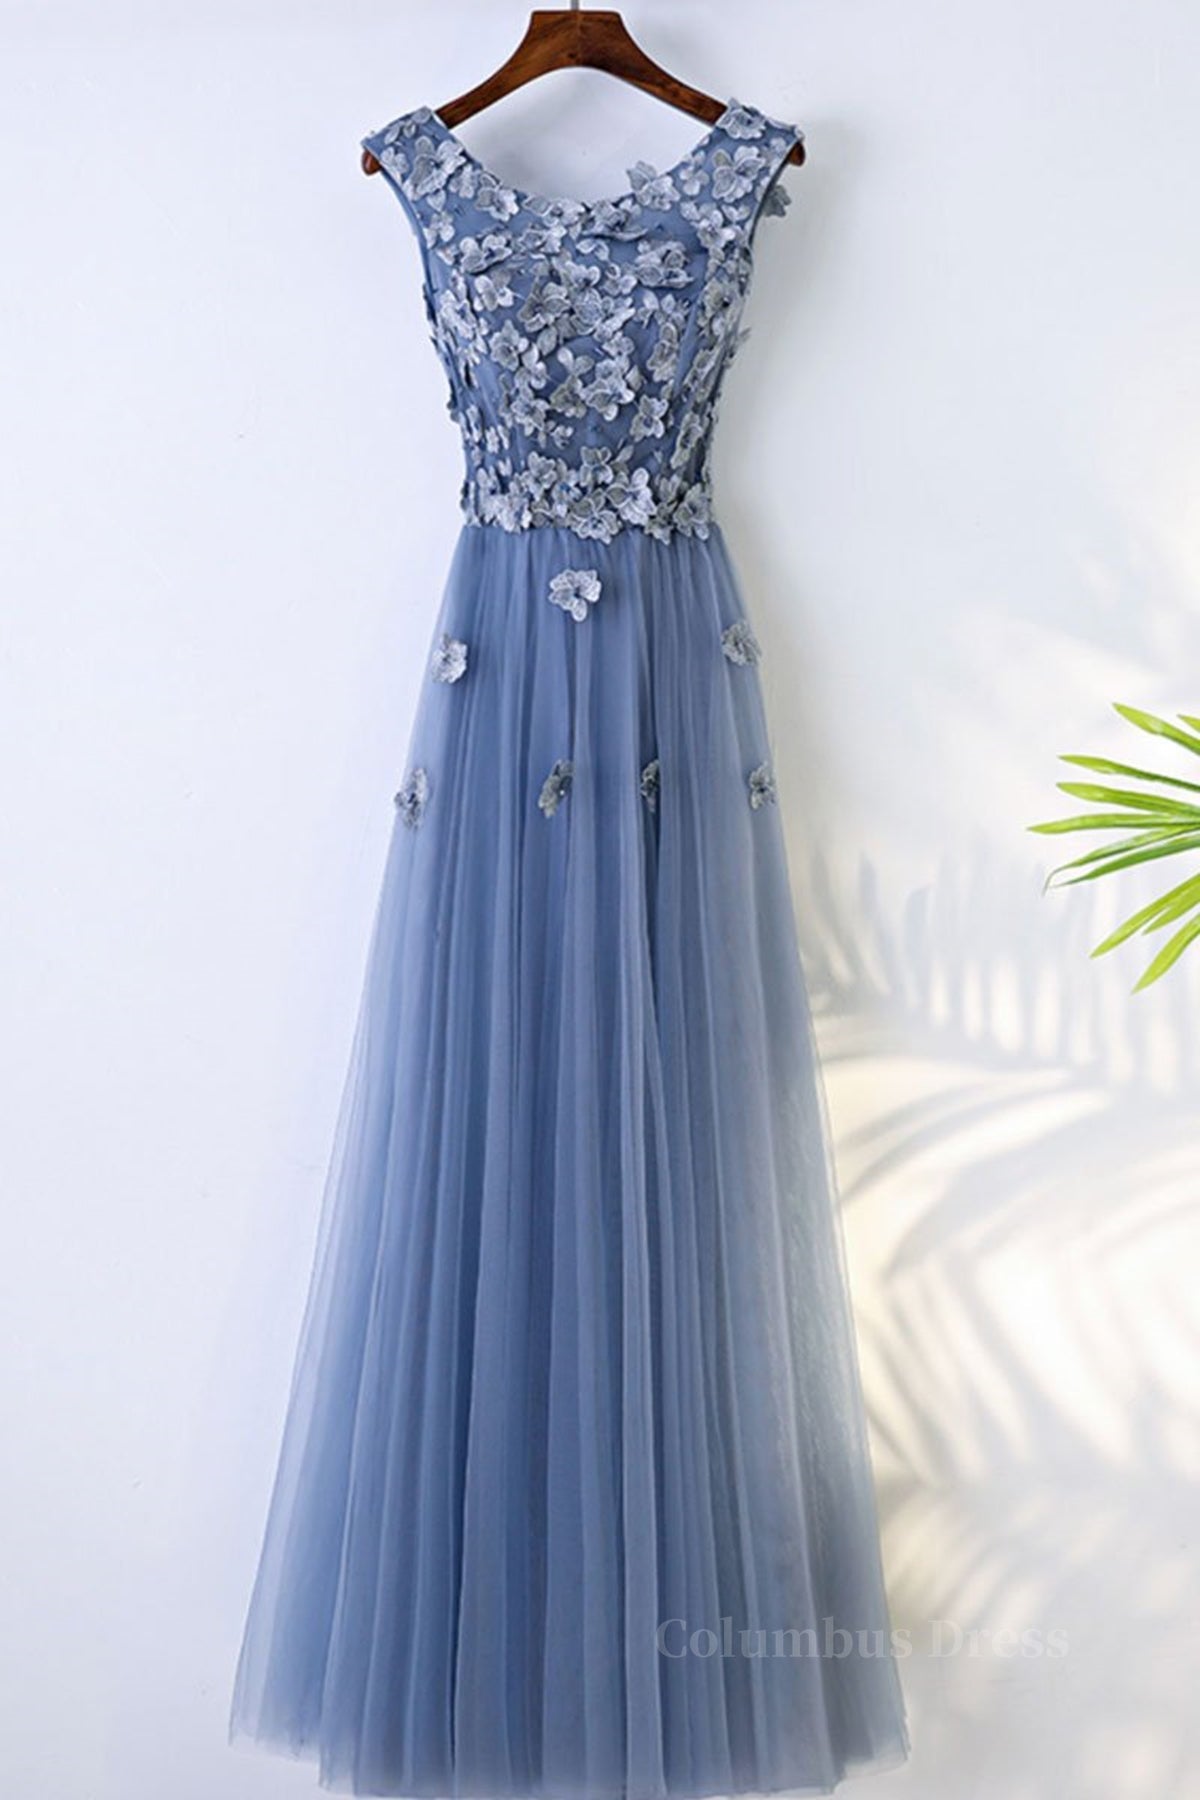 Silk Prom Dress, Round Neck Blue Lace Floral Long Prom Dresses, Blue Lace Long Formal Evening Dresses